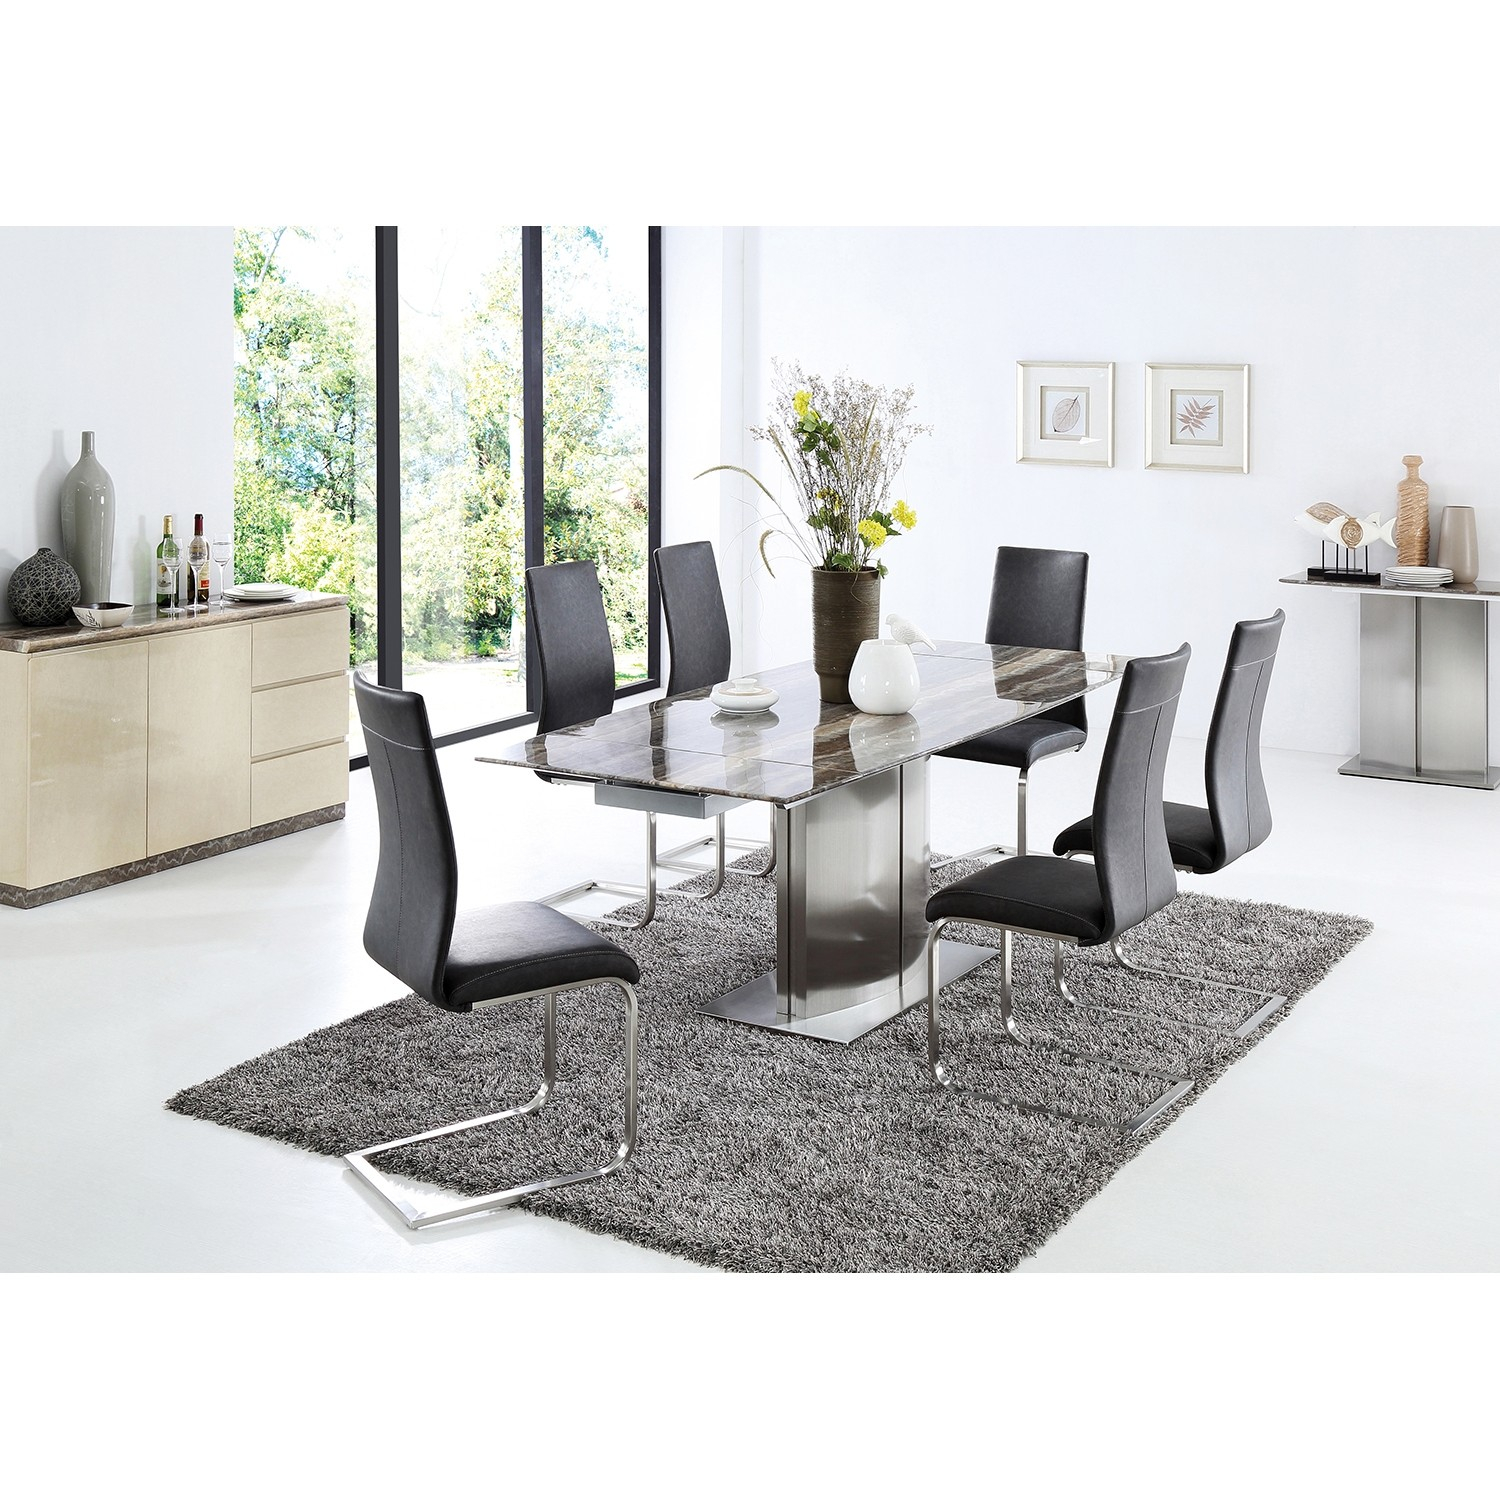 Casa Wave Dining Table 6 Chairs Dining Set regarding size 1500 X 1500